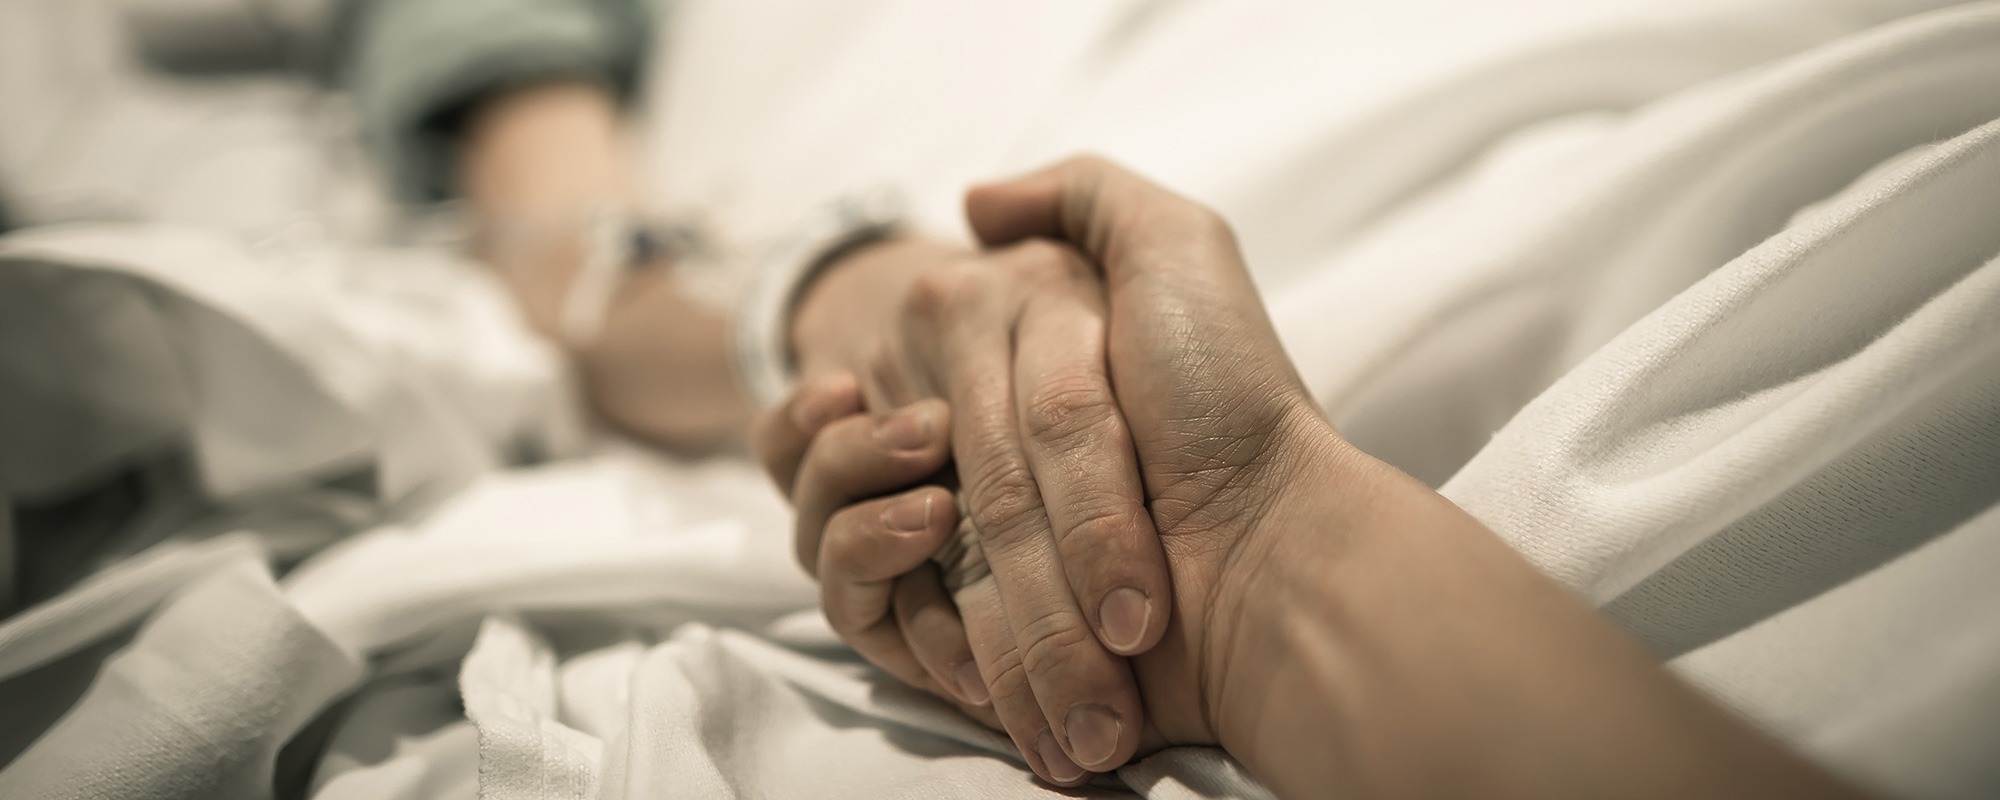 Carer holding hands with resident for end of life